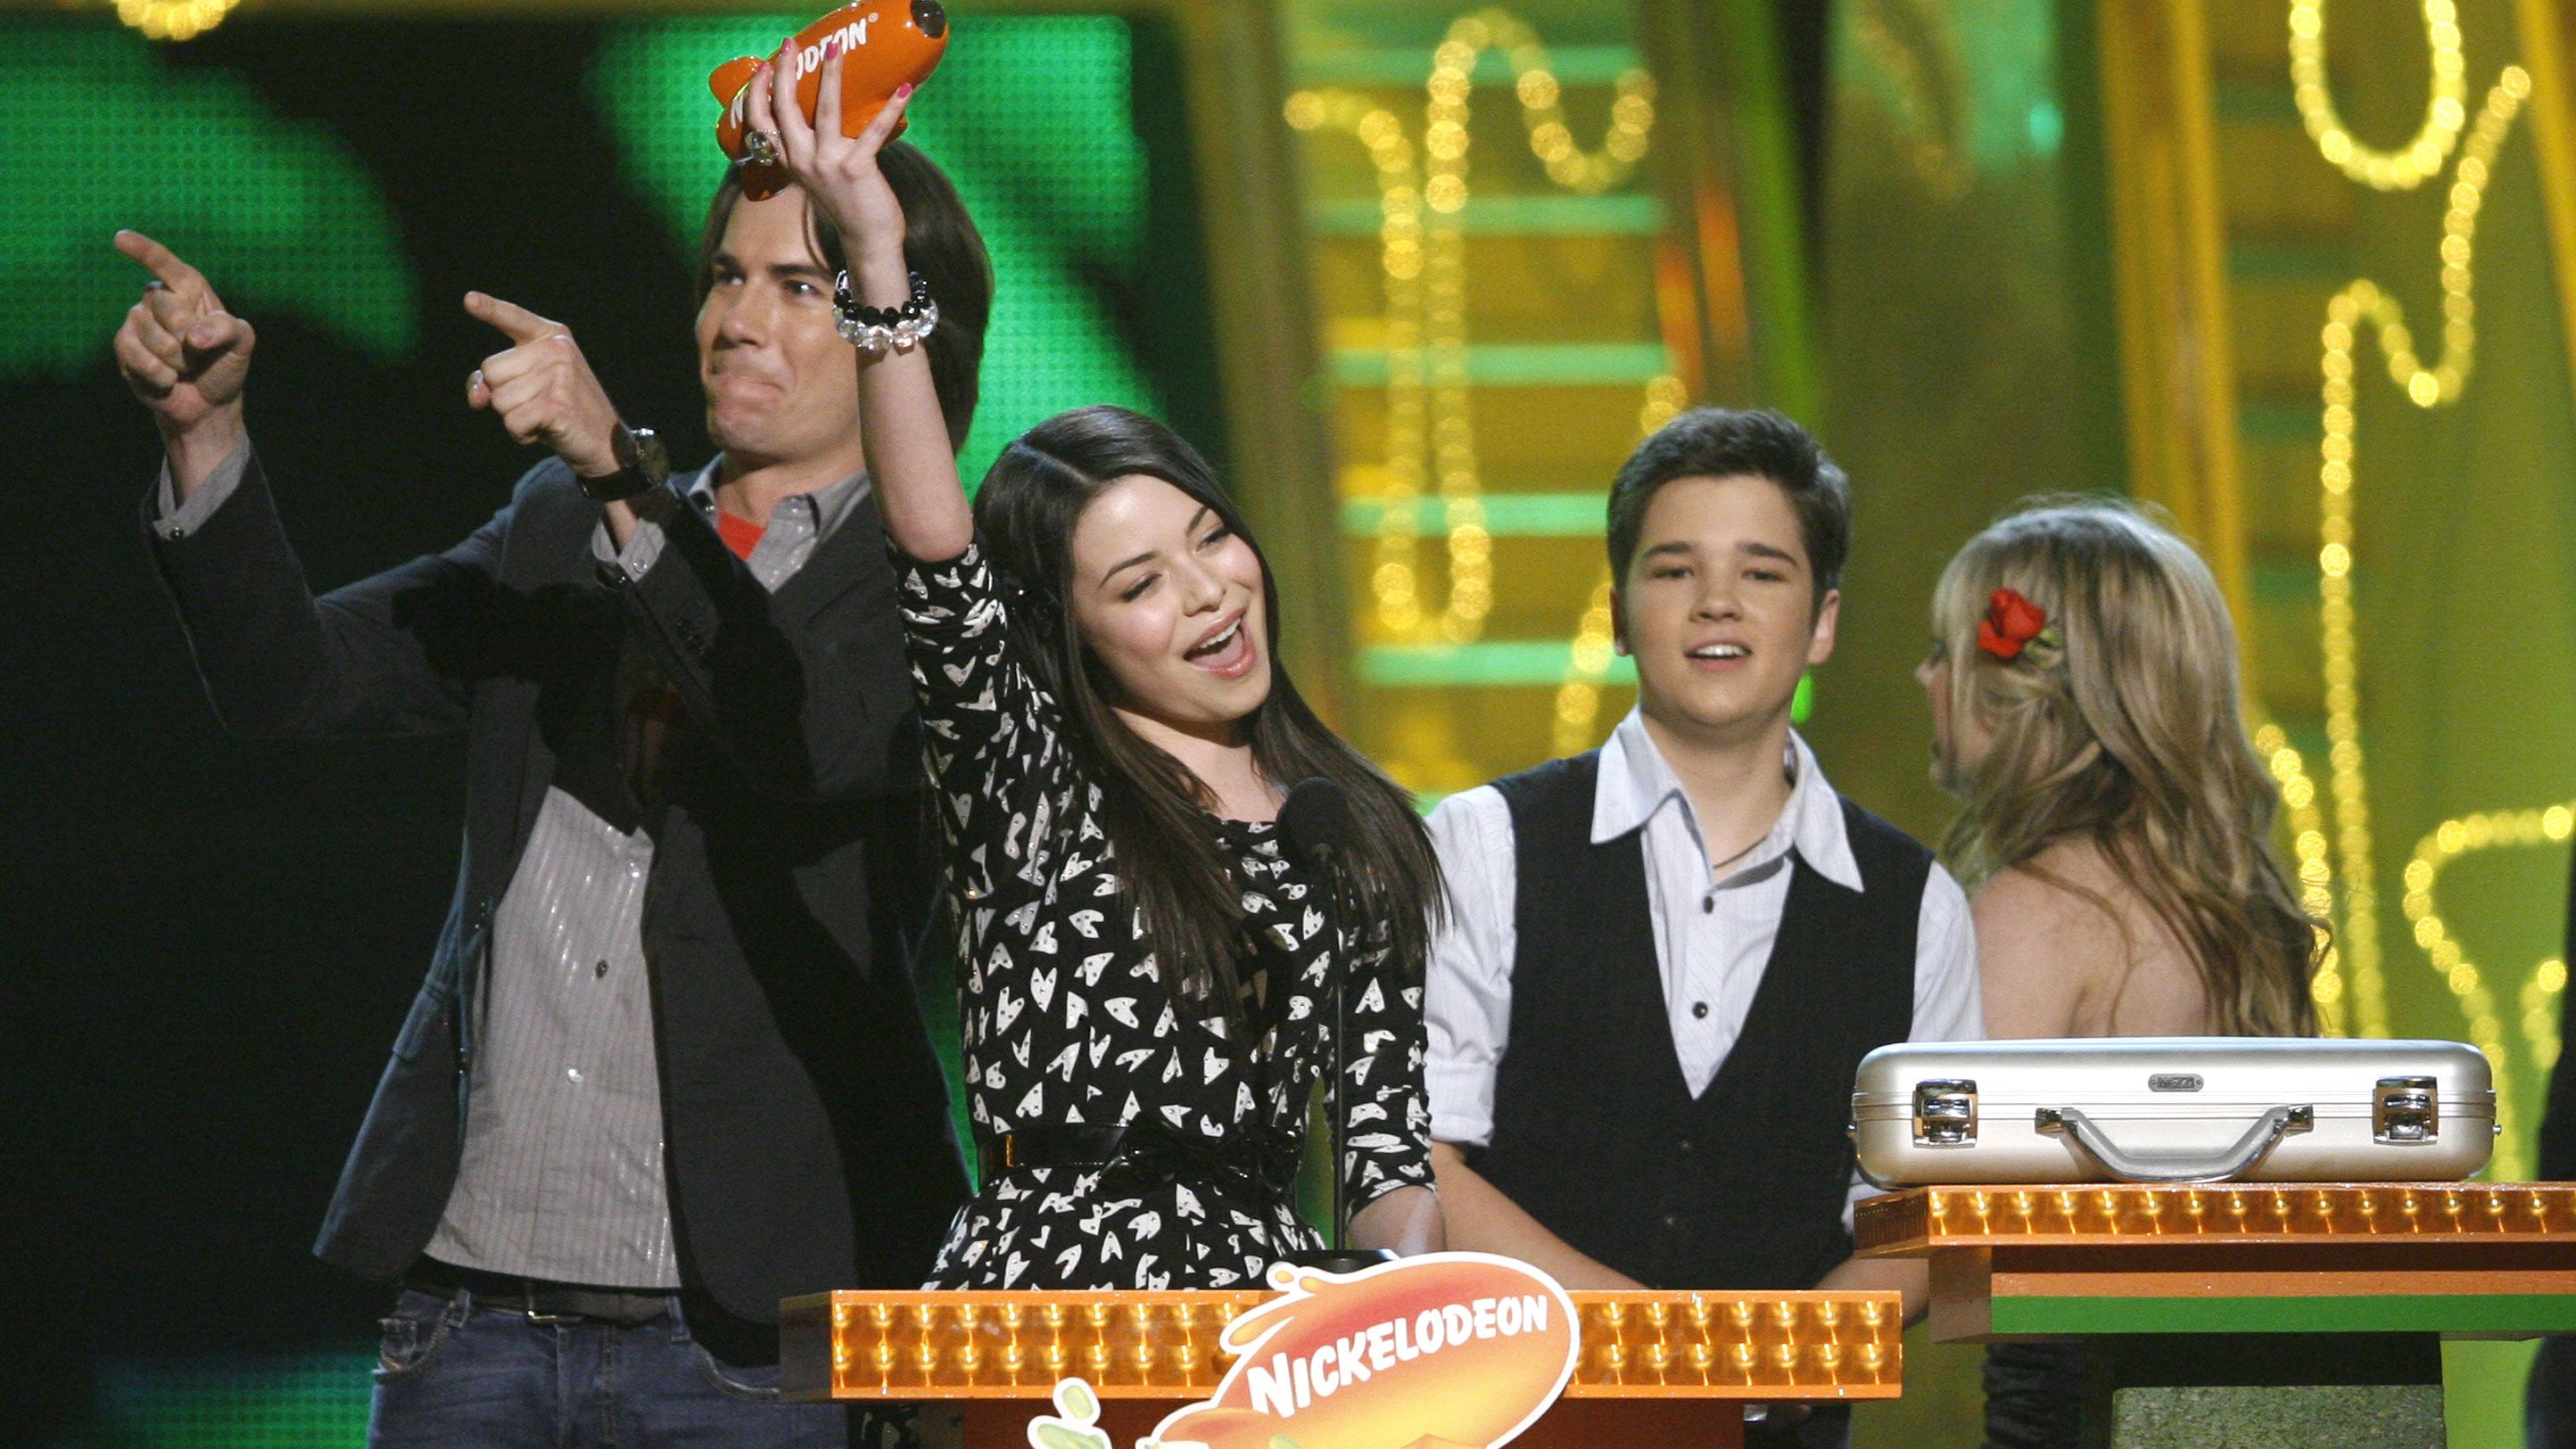 iCarly' gets a reboot with the original cast